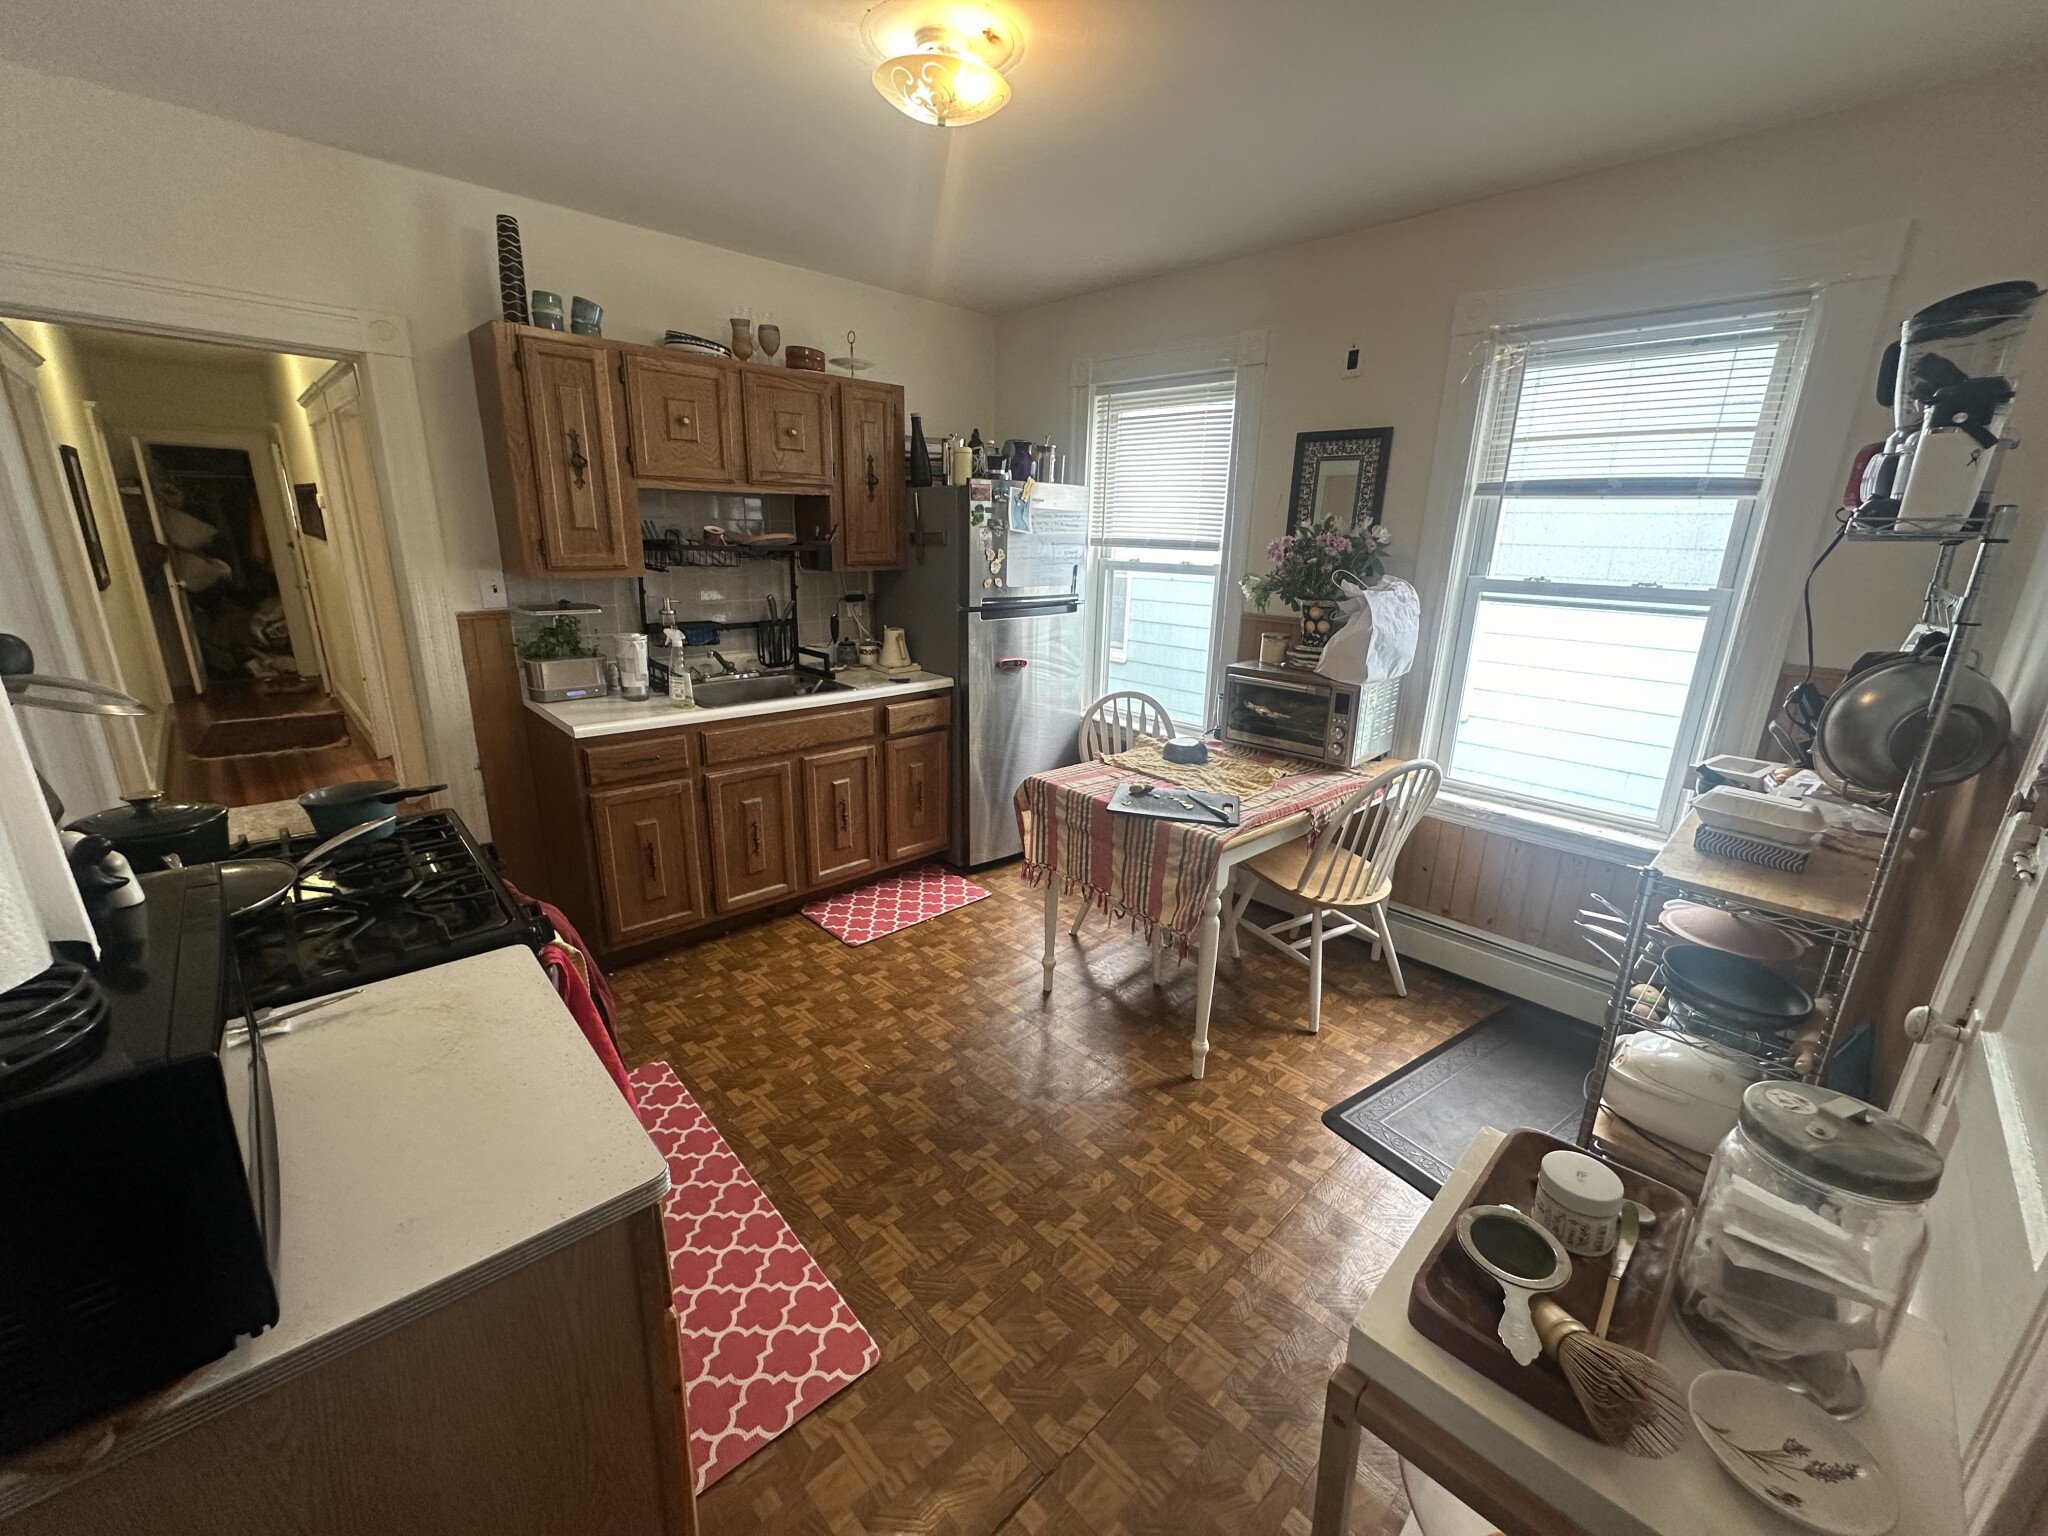 Photos of apartment on Harold St.,Somerville MA 02143